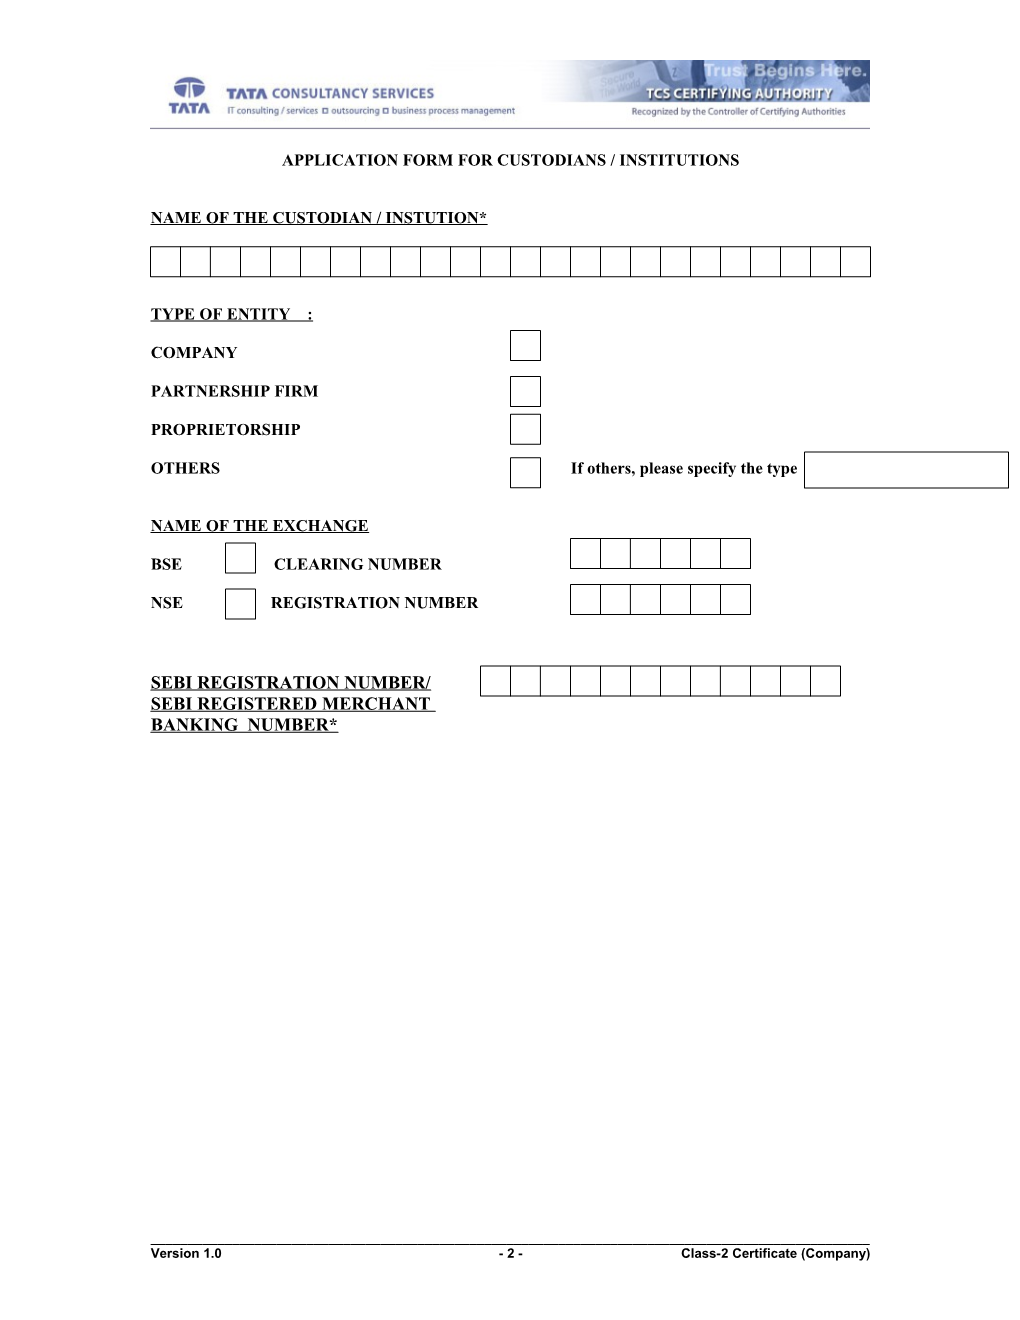 Form for Class-2 COMPANY Type of Cetificate